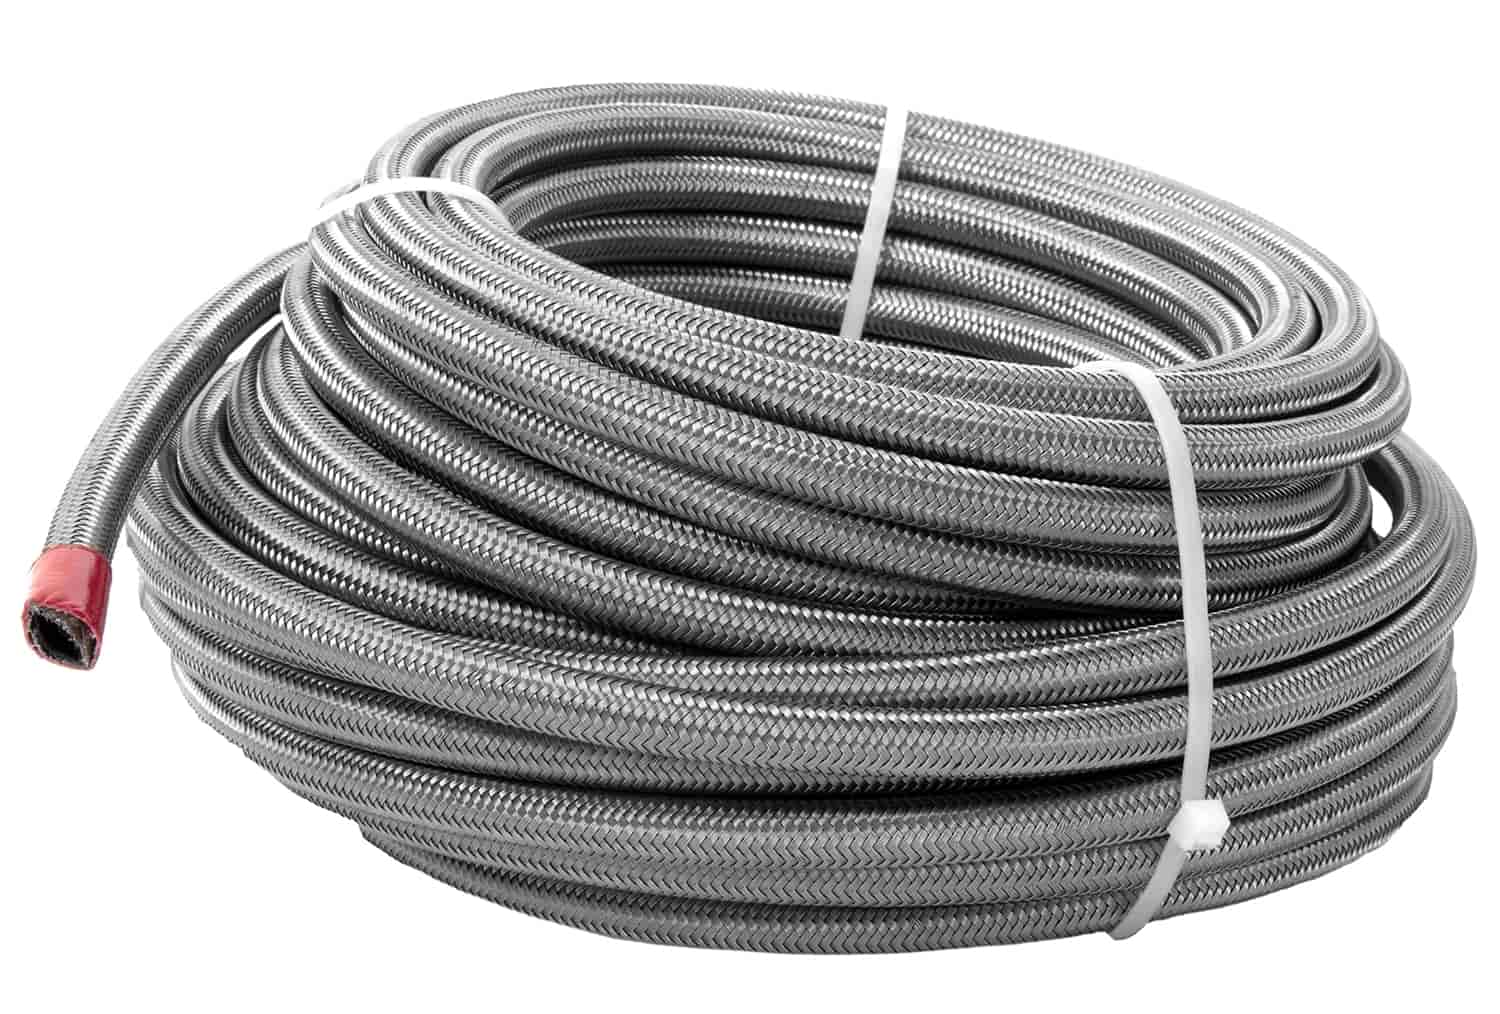 Braided Stainless Steel PTFE Fuel Hose -8 AN x 12 ft